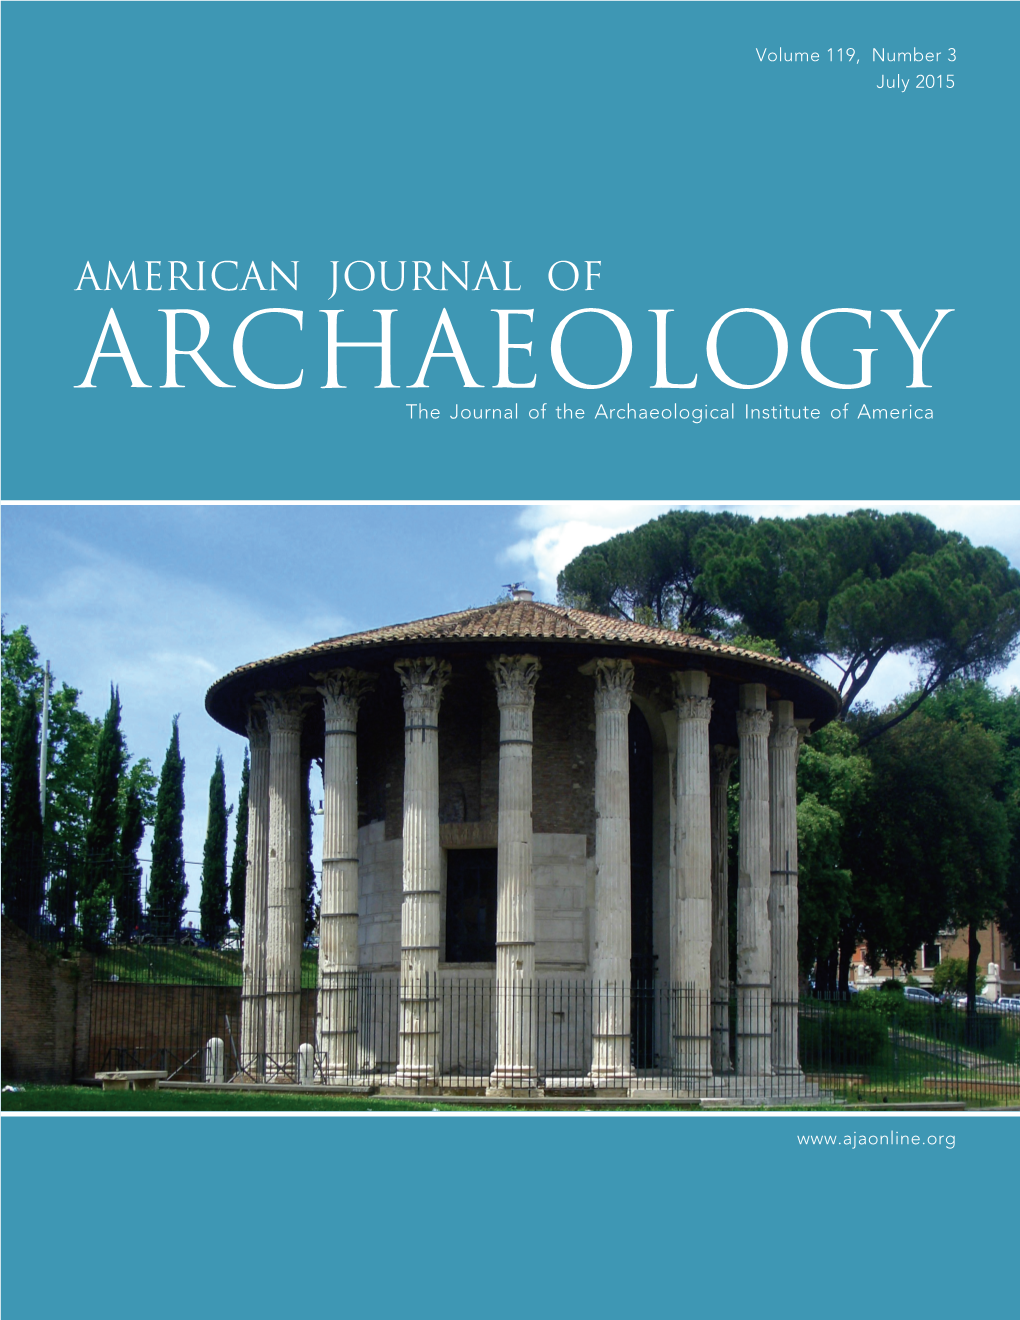 Chronological Contexts of the Earliest Pottery Neolithic in the South